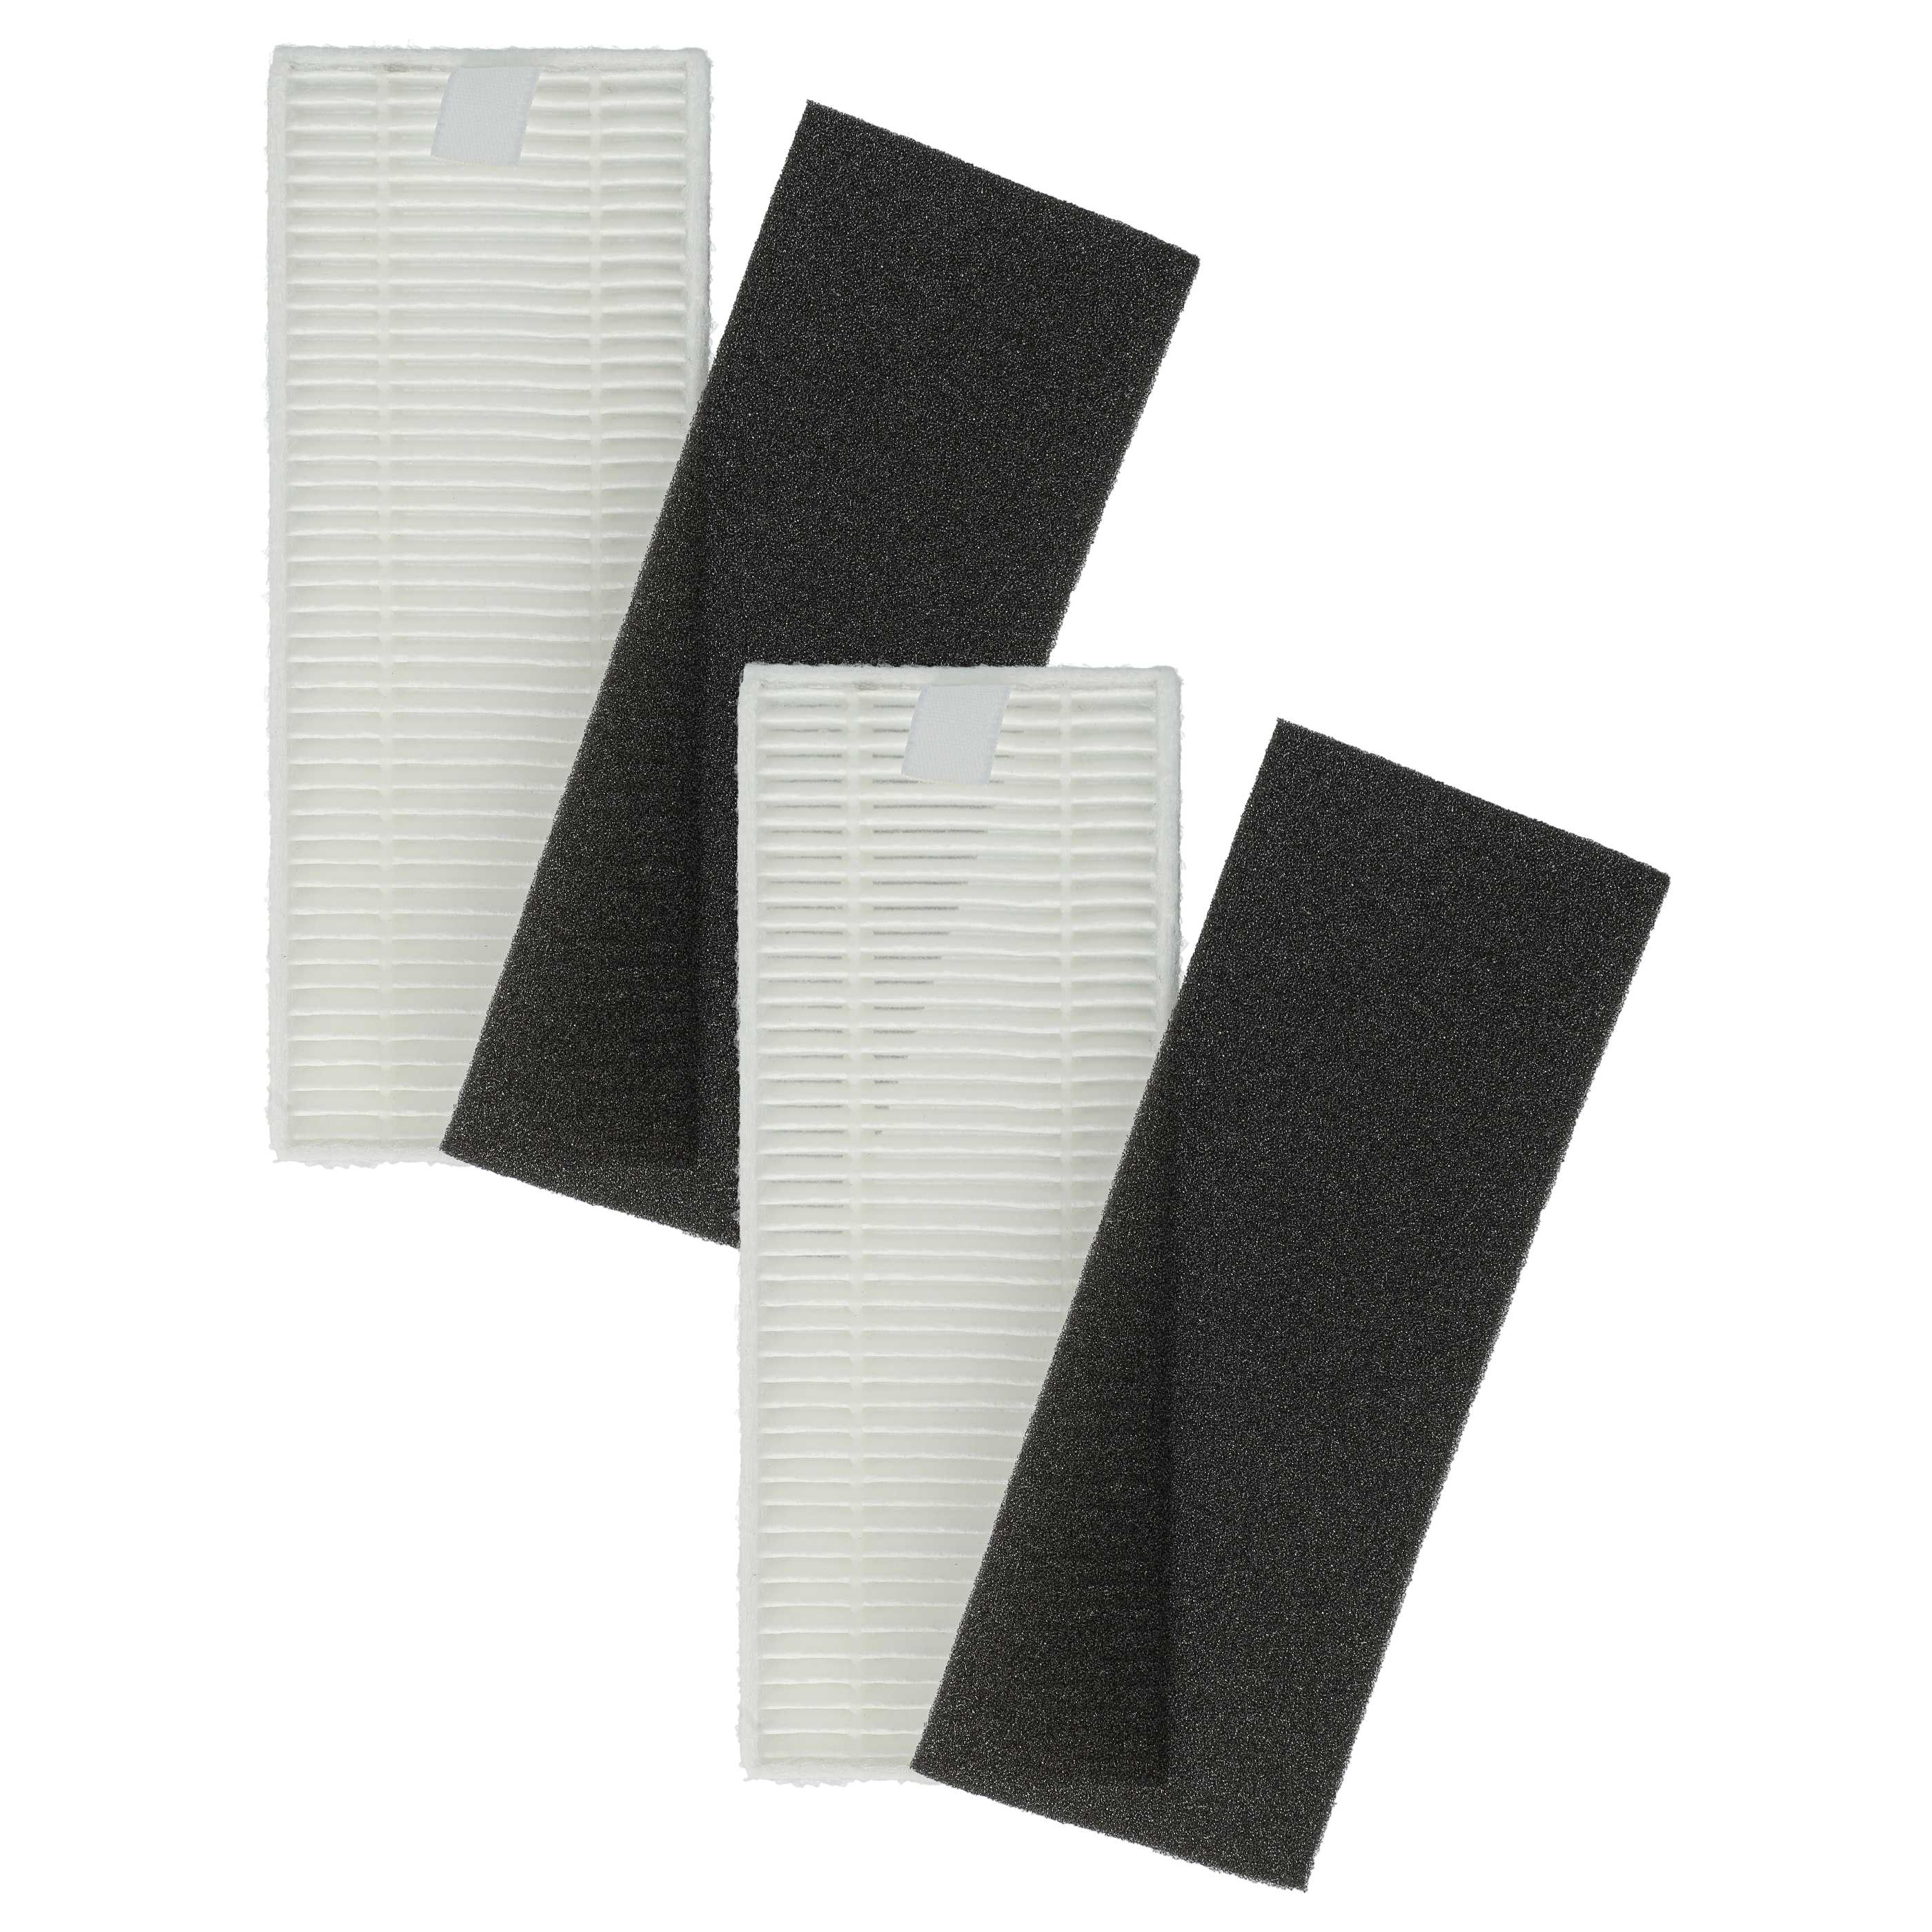 4x filter / foam filter replaces Rowenta ZR720002 for Tefal Vacuum Cleaner